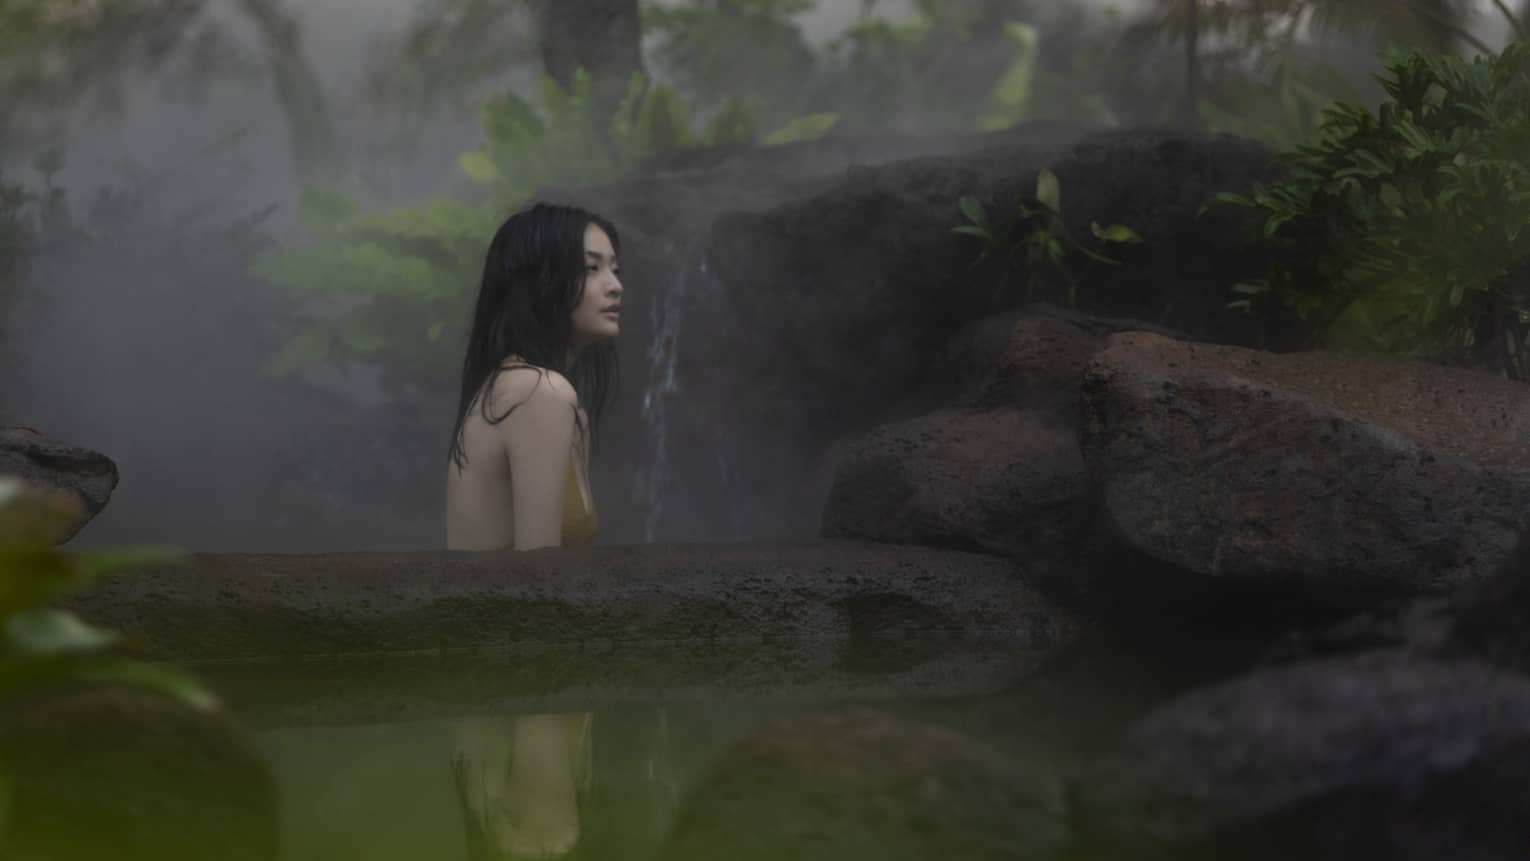 In the mist, a woman sits in an outdoor pool that looks like a pond, surrounded by stones and tropical trees